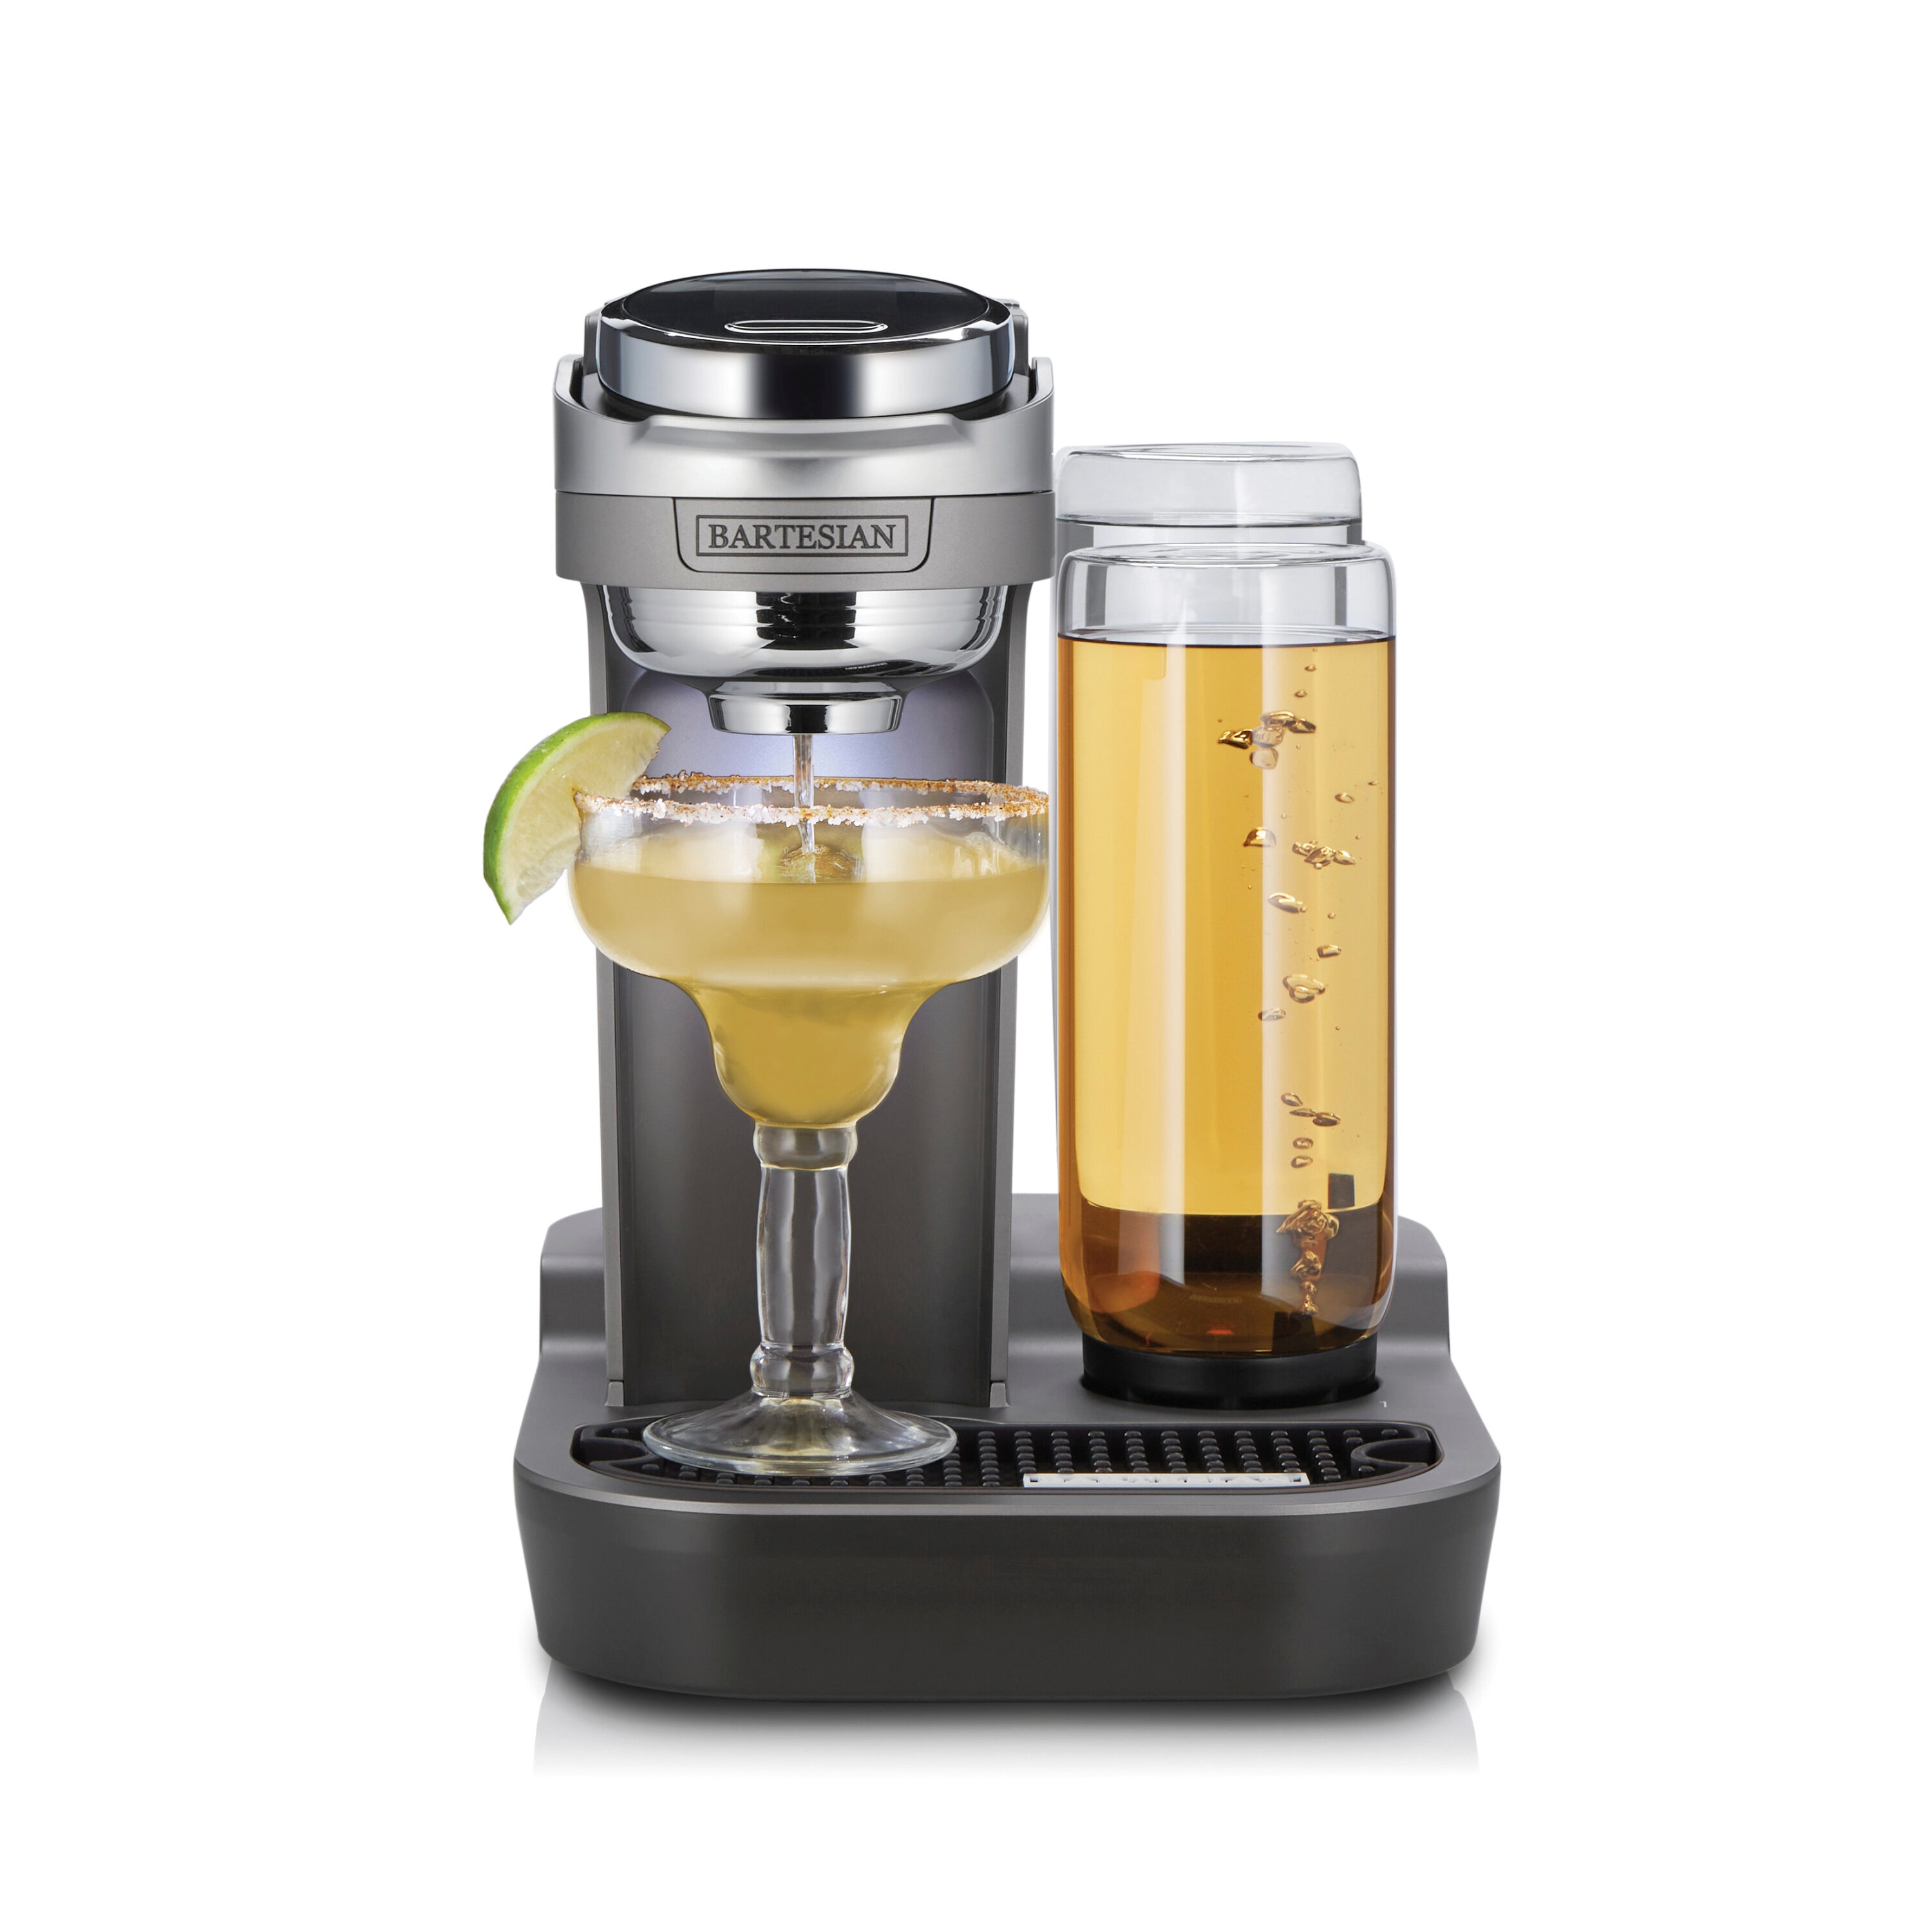 Cocktail maker Small Appliances at